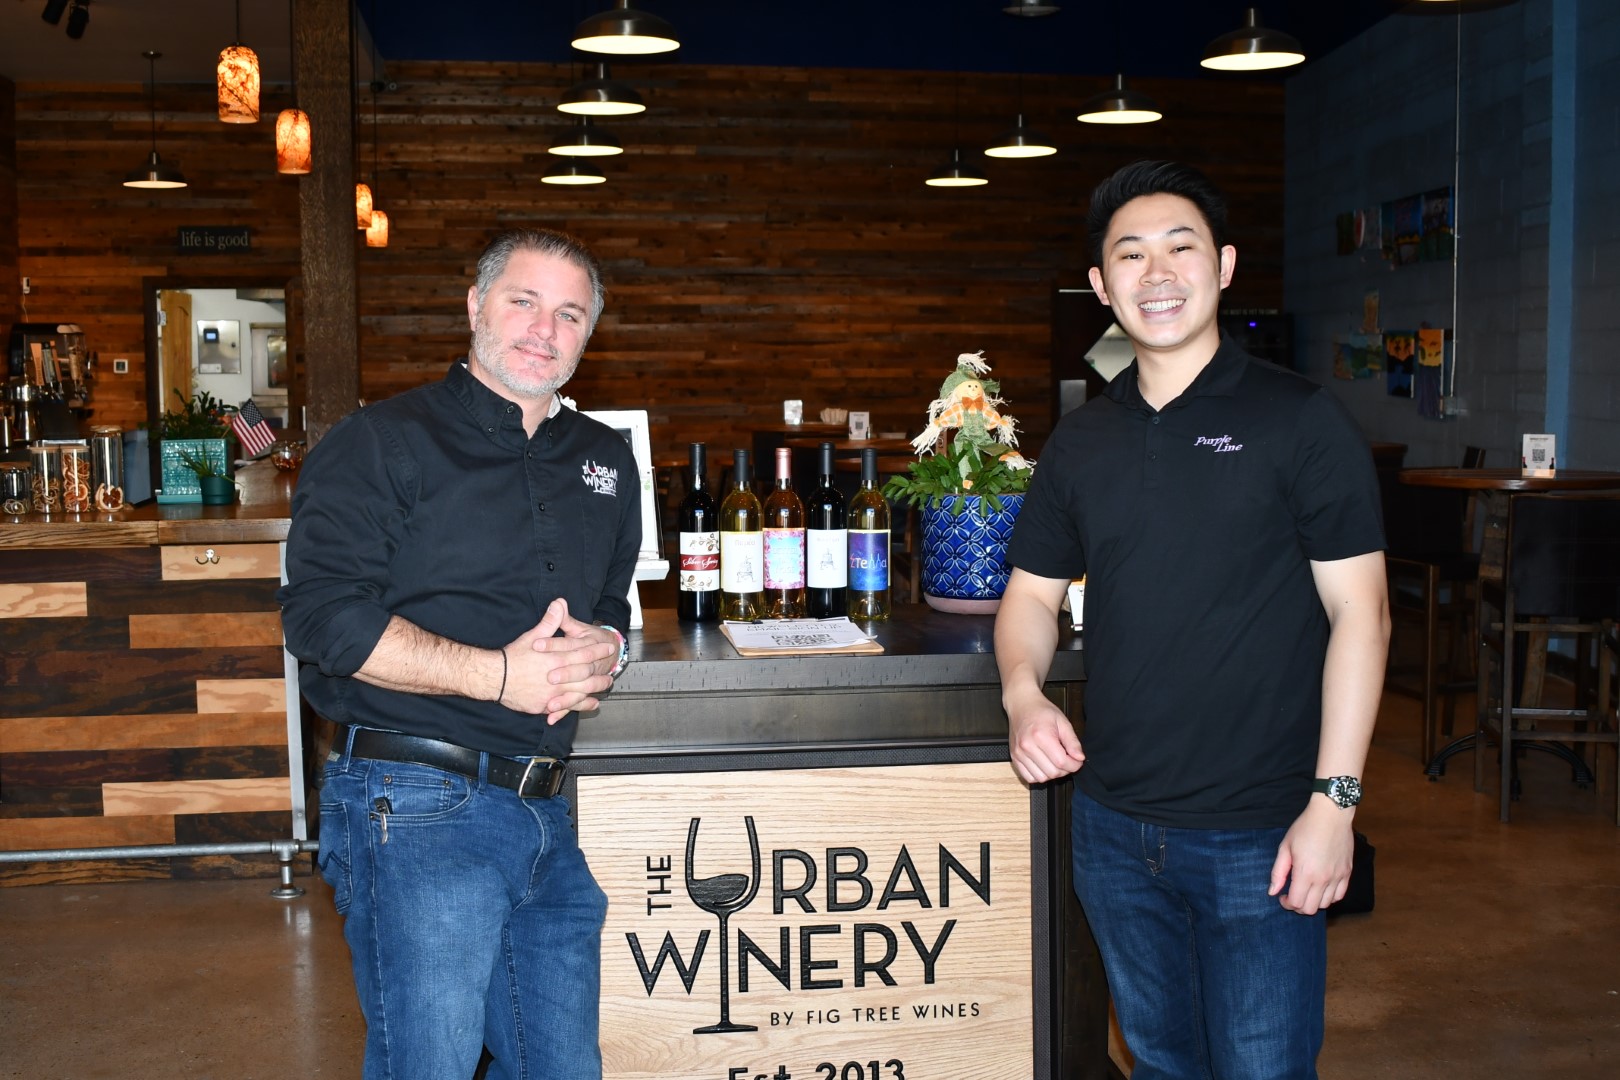 Two men in Urban Winery shirts stand beside the reception area podium. The wine bar and seating is visible in the background.